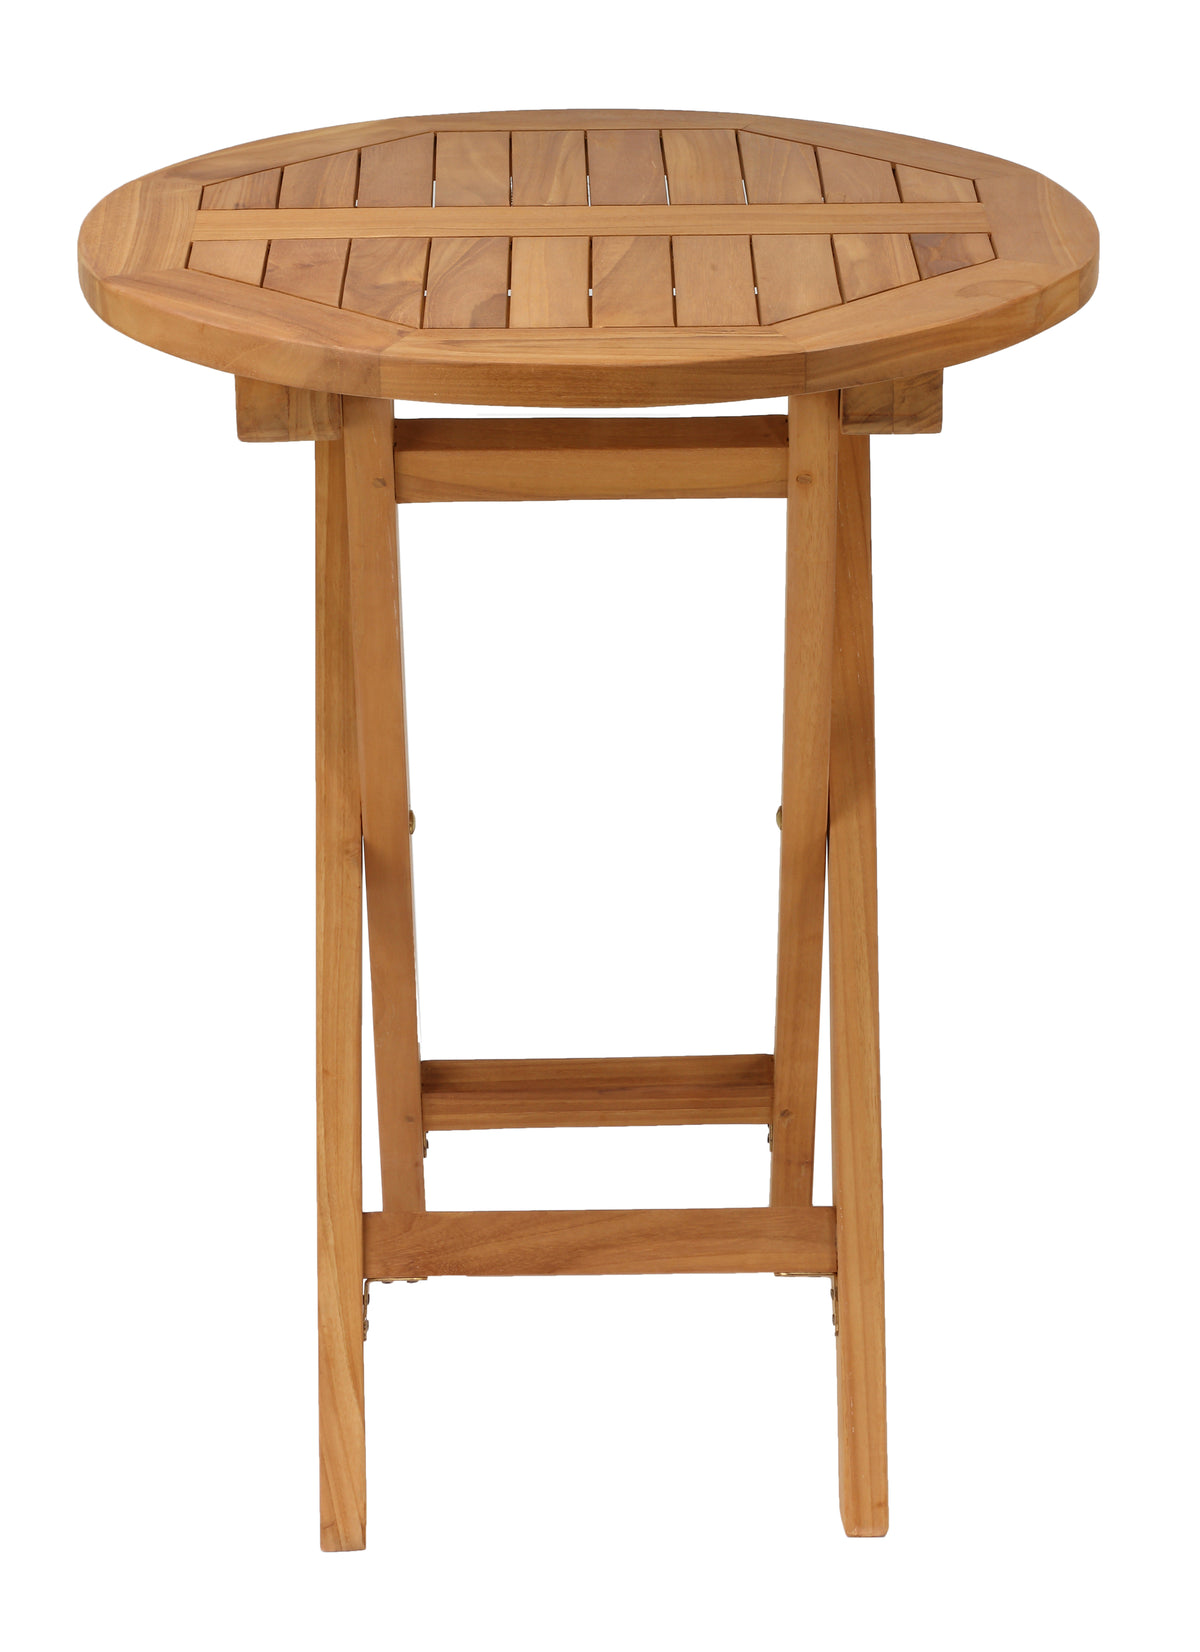 Bare Decor Evie Outdoor Teak Folding Dining Table 24&quot; Round